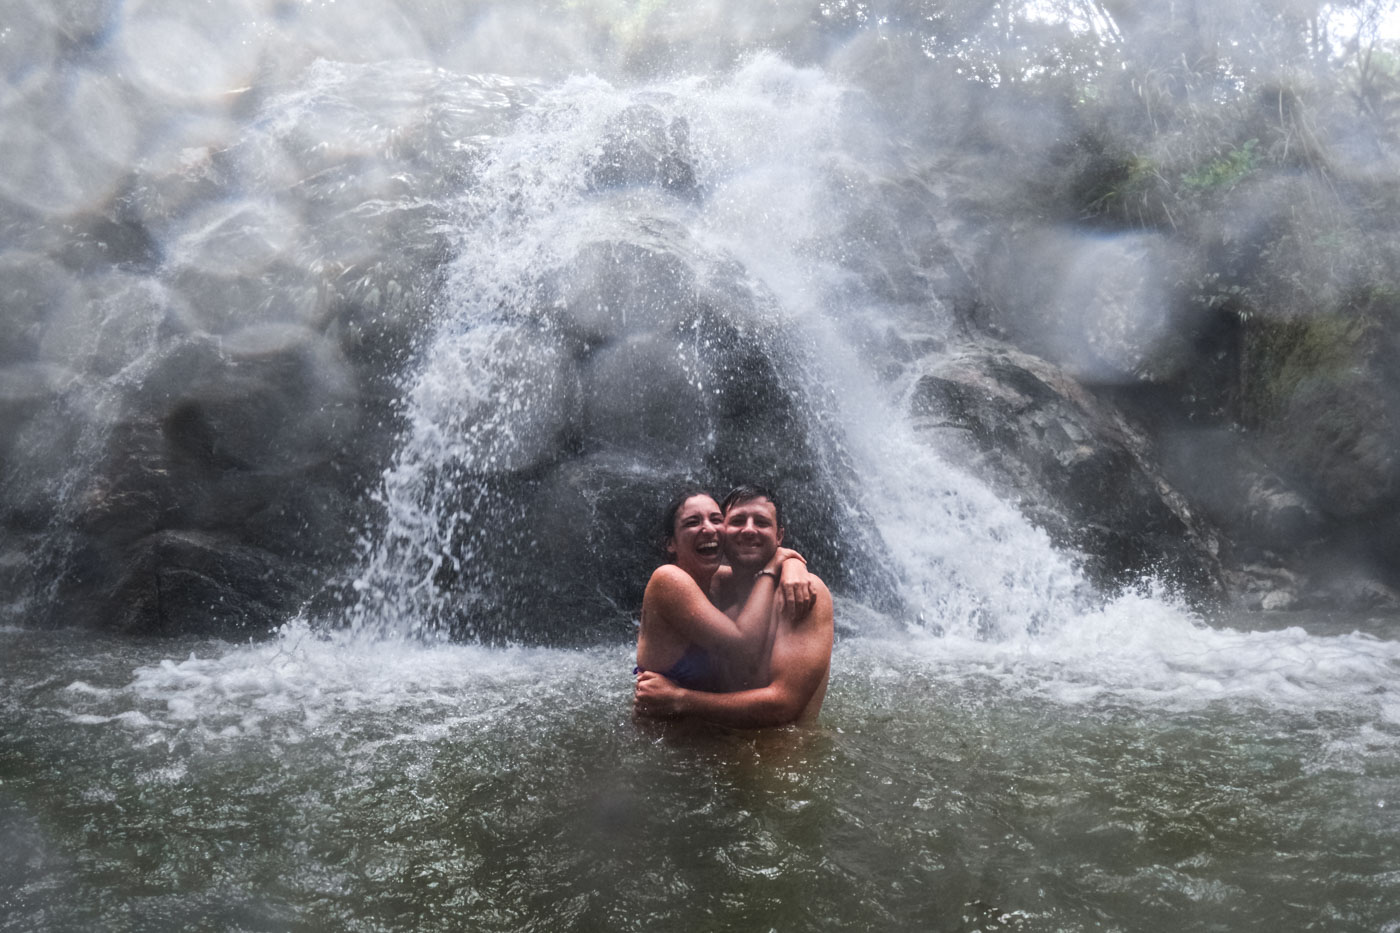 Ryan and Sara hugging tightly while being blasted by the water by the lower Marinka Waterfall.